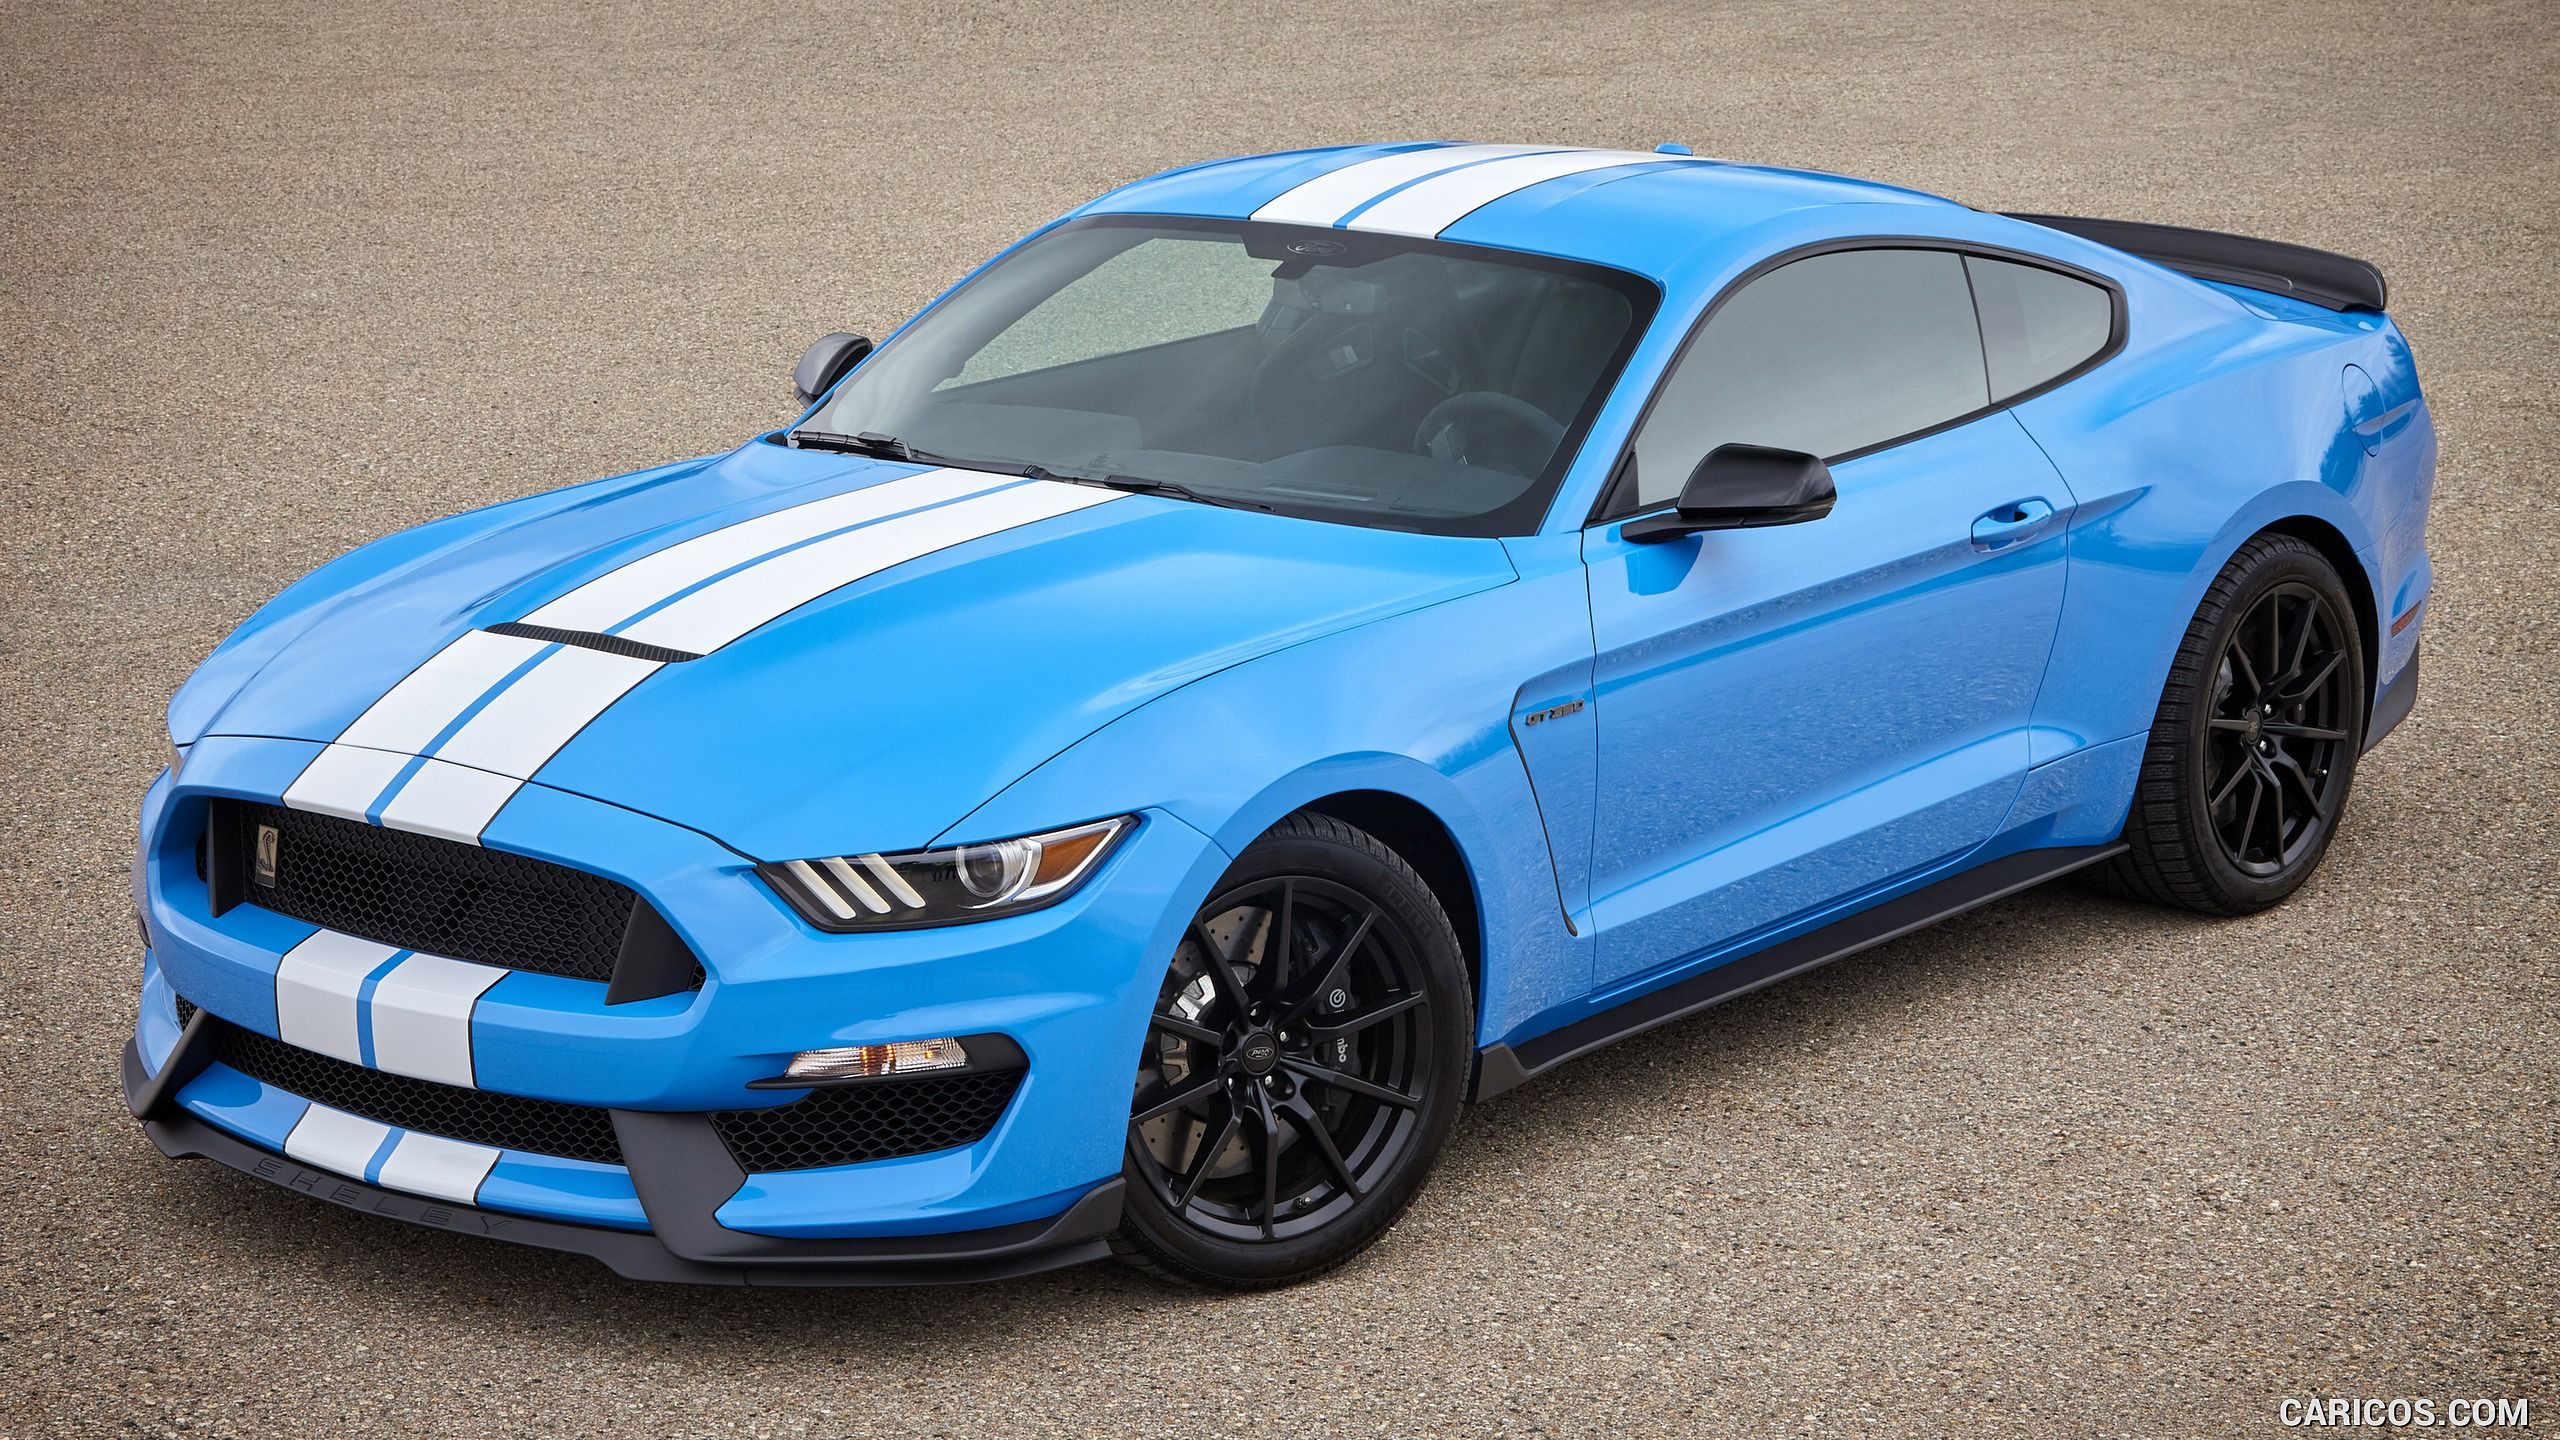 Ford Mustang Shelby GT350 (Color: Grabber Blue). HD Wallpaper